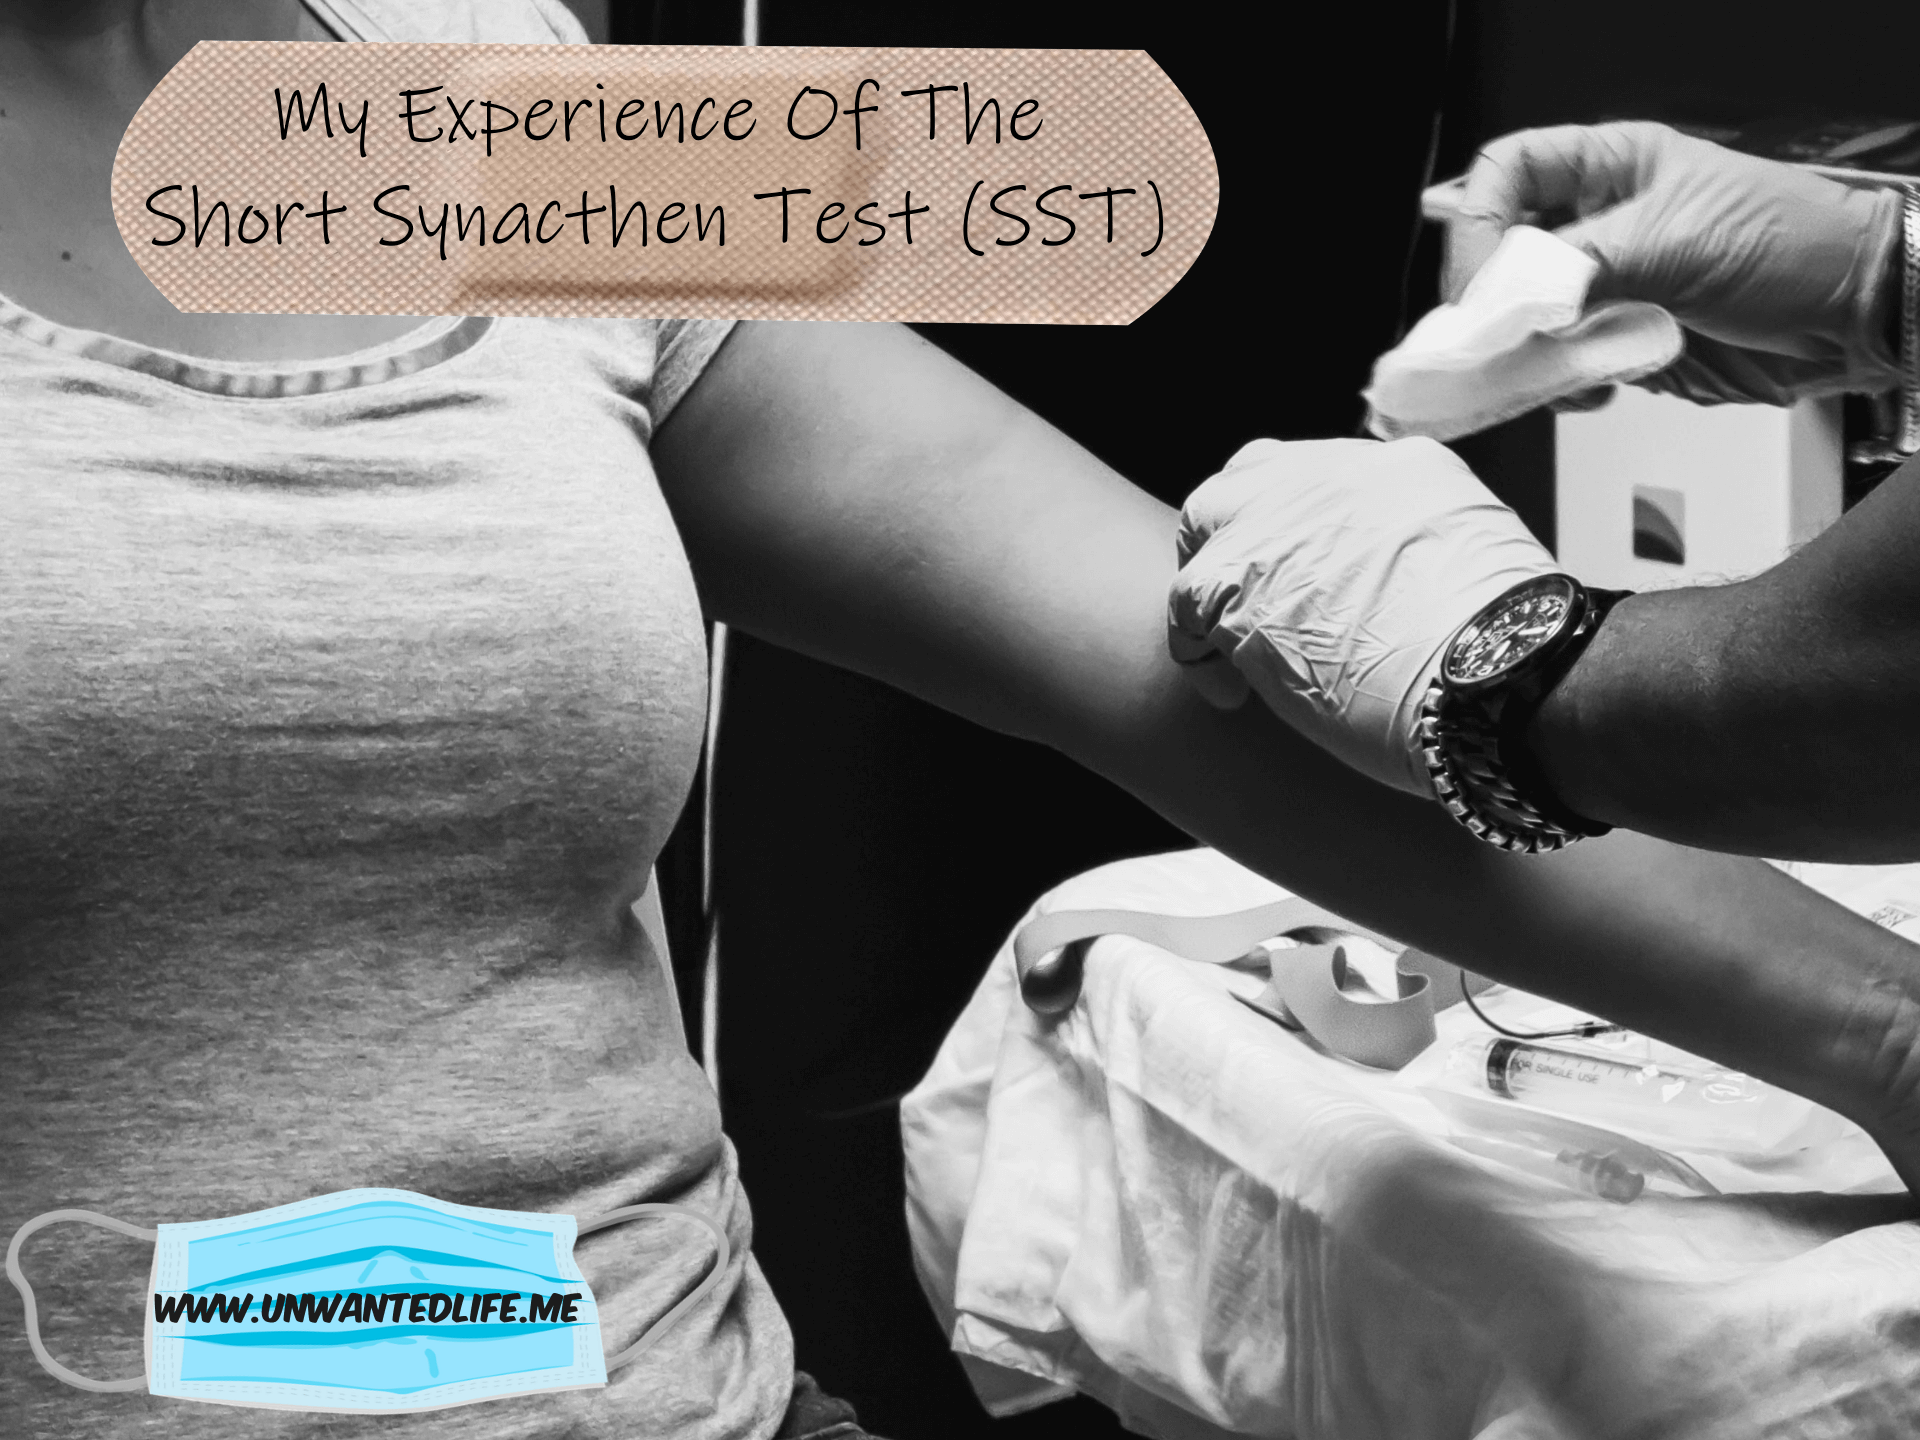 A black and white photo of a woman who's being prepared to have a needle put into her arm with the article title - My Experience Of The Short Synacthen Test (SST) - in the top left corner of the image